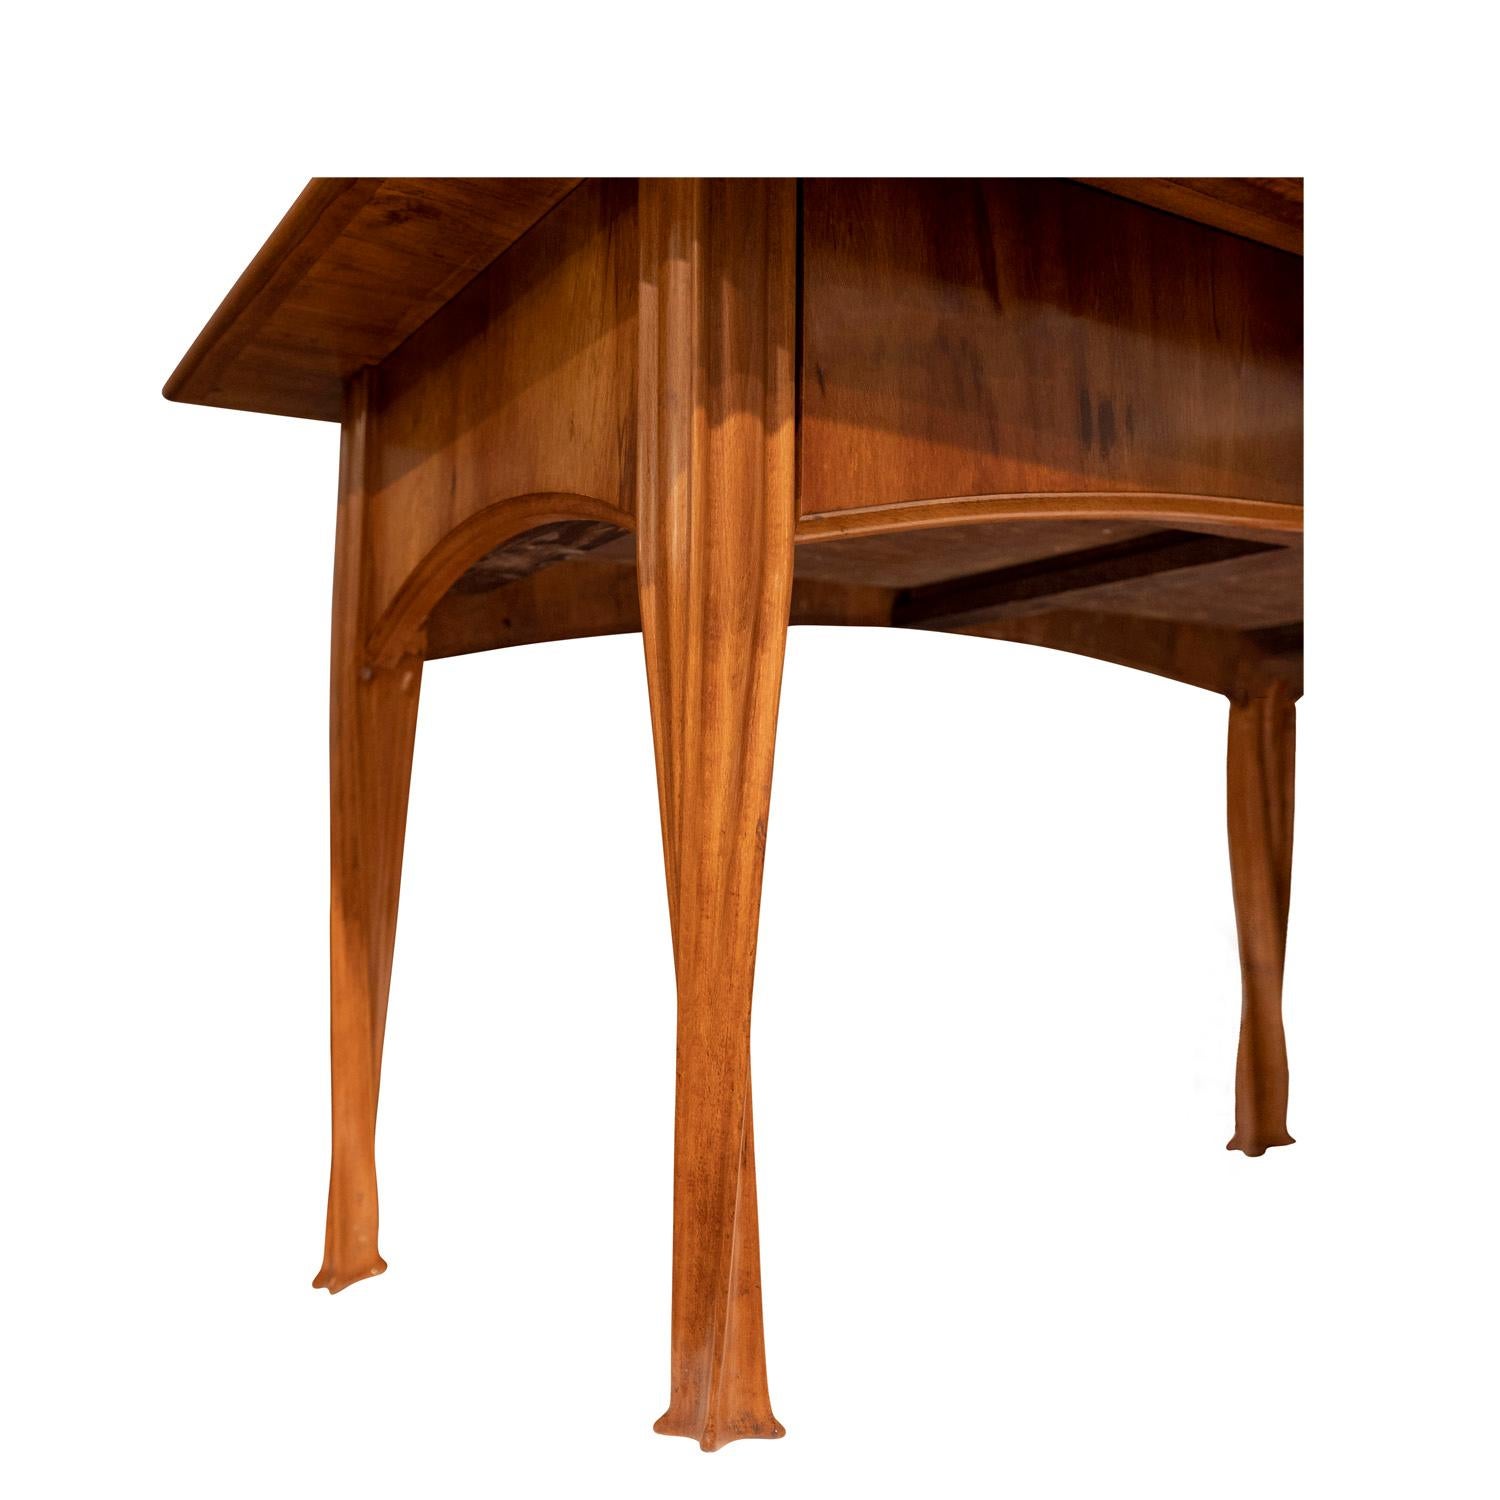 Wood Louis Majorelle Rare Writing Desk with Botanical Inlays ca. 1900 (Signed) For Sale